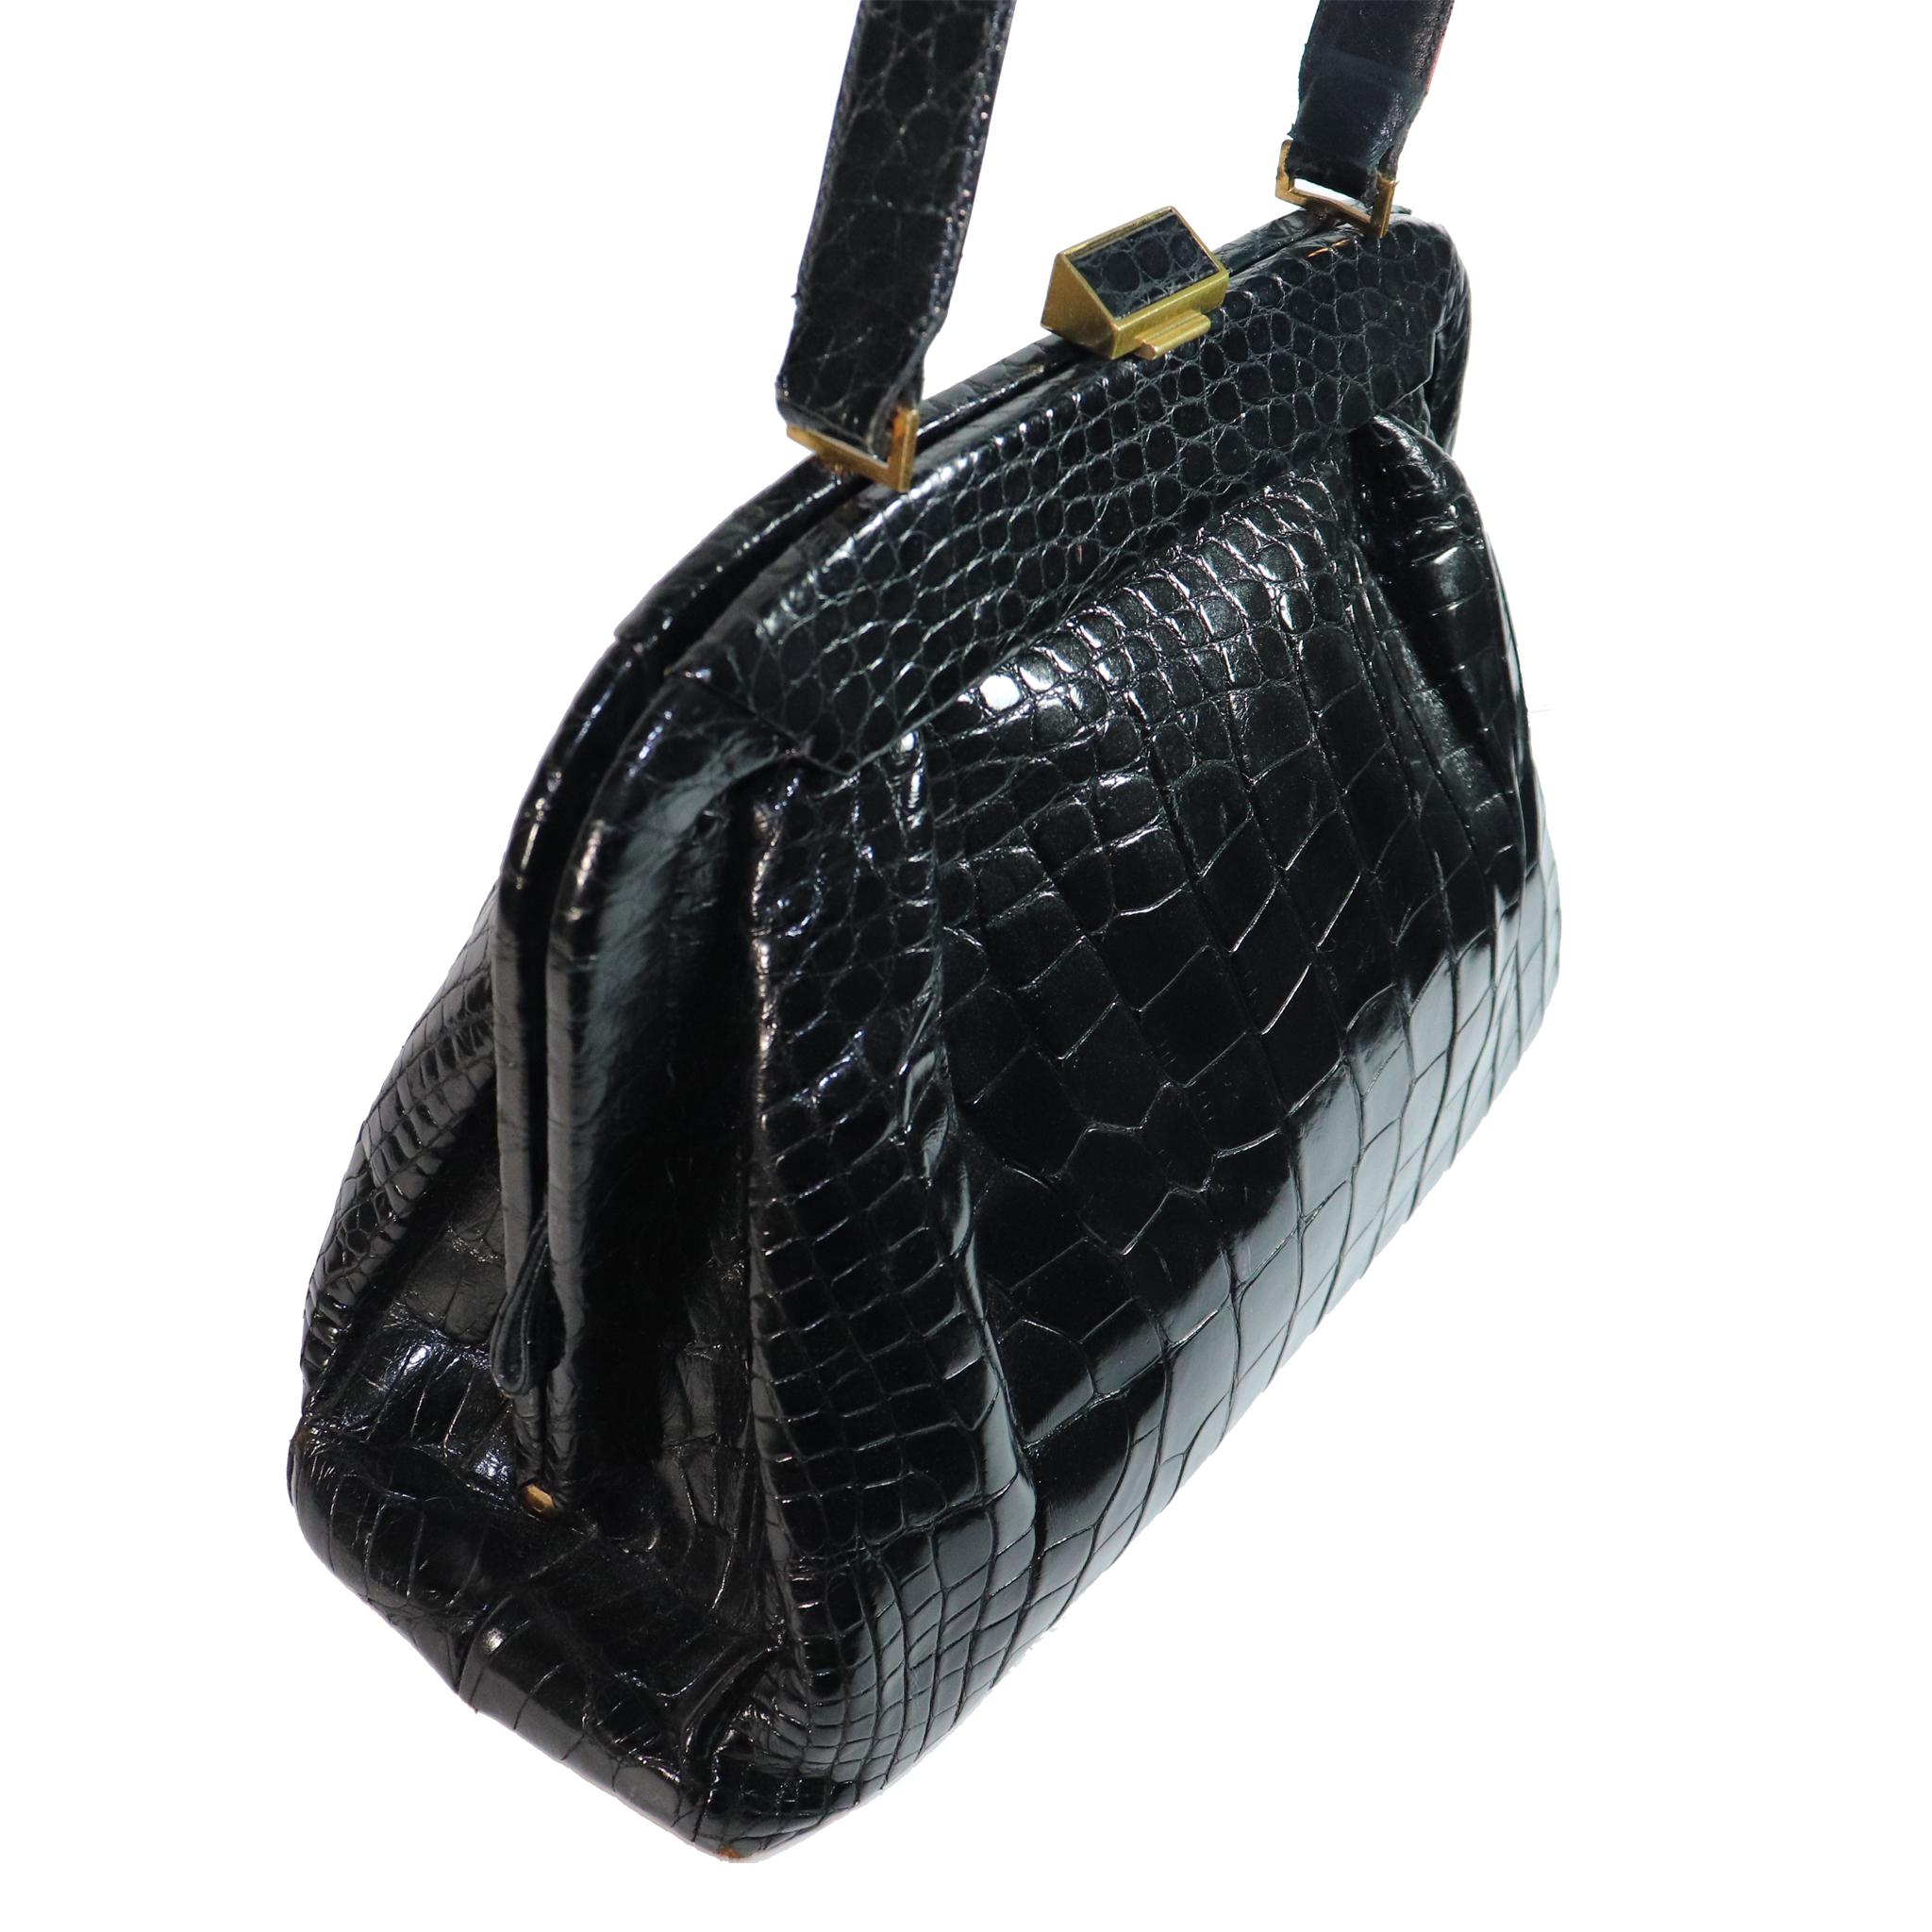 Koret Black Alligator Large Top Handle Bag made in America, comes with attached coin purse and a Kent London pocket Comb.
VERY RARE  

Measurements:

Height - 9.5 inches 
Width - 15 inches 
Height with Strap - 16.2 inches 